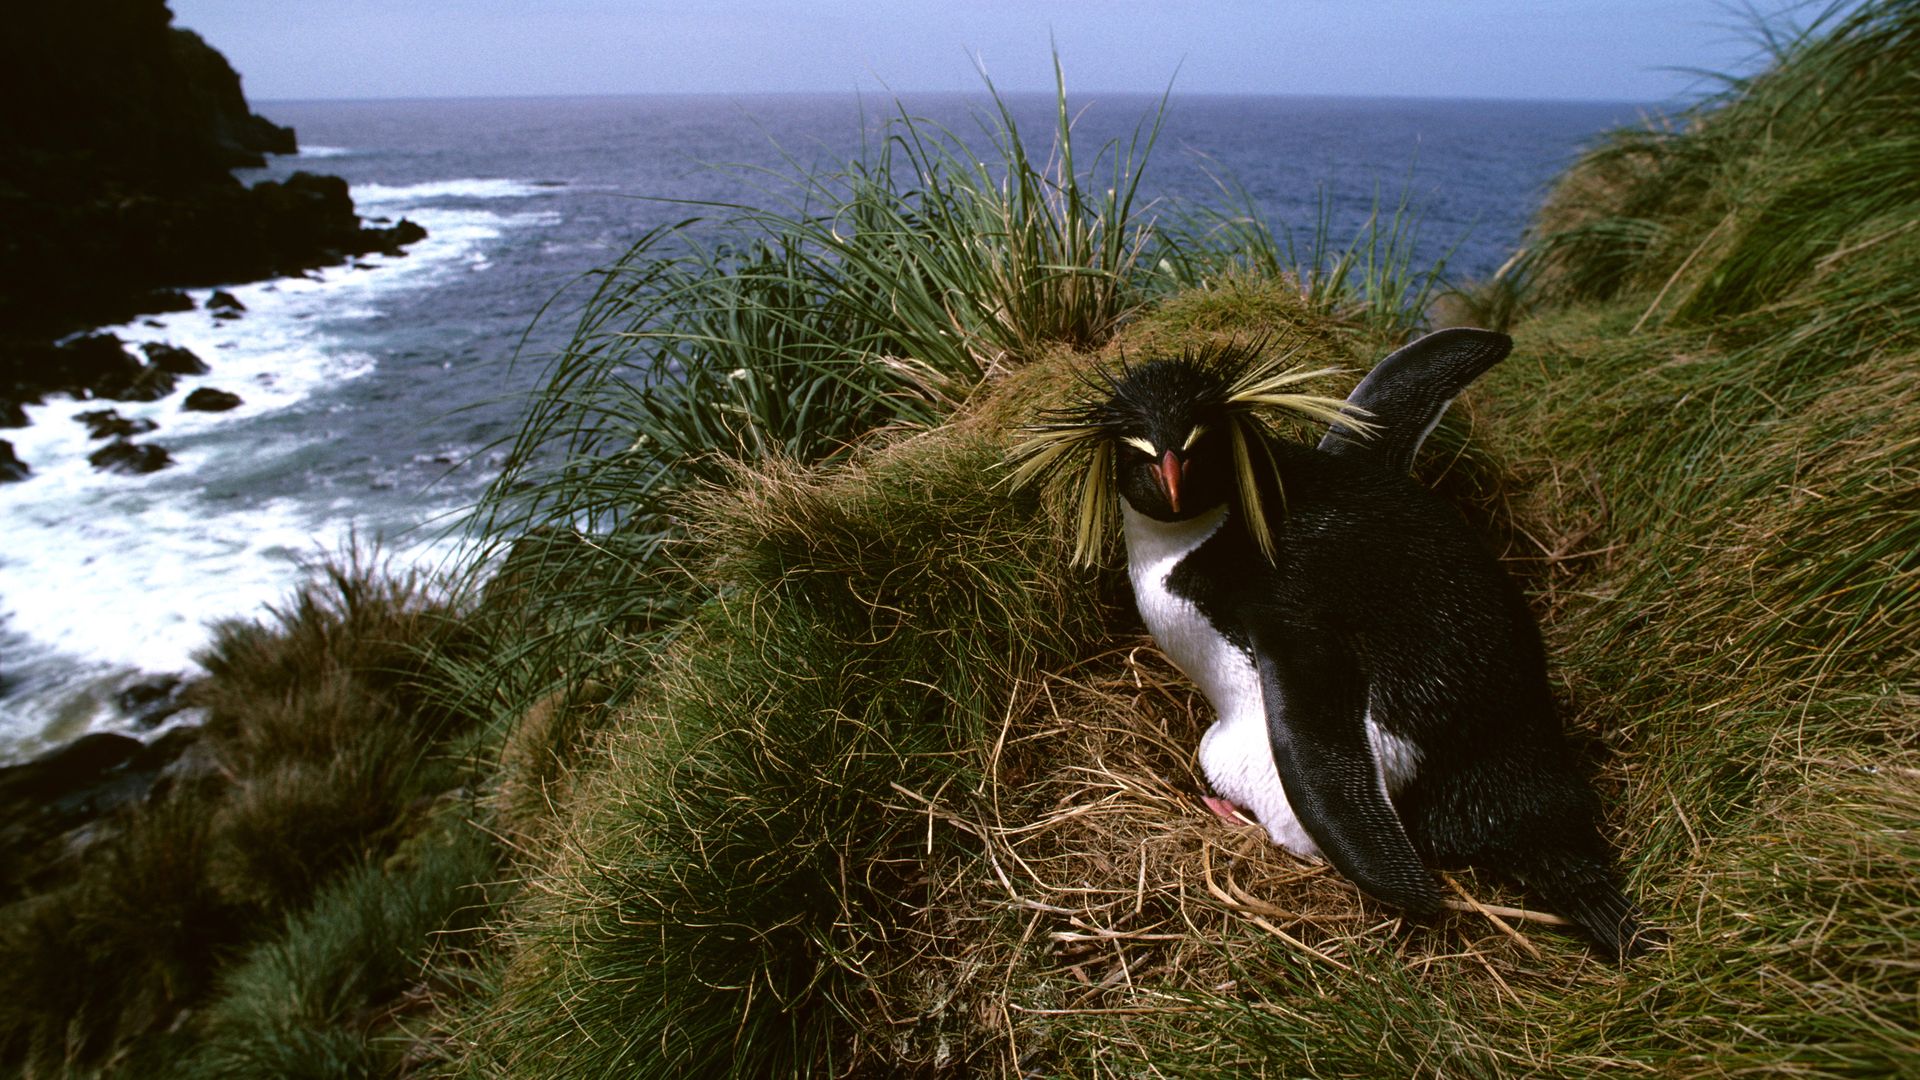 Penguins on Gough Island in the South Atlantic